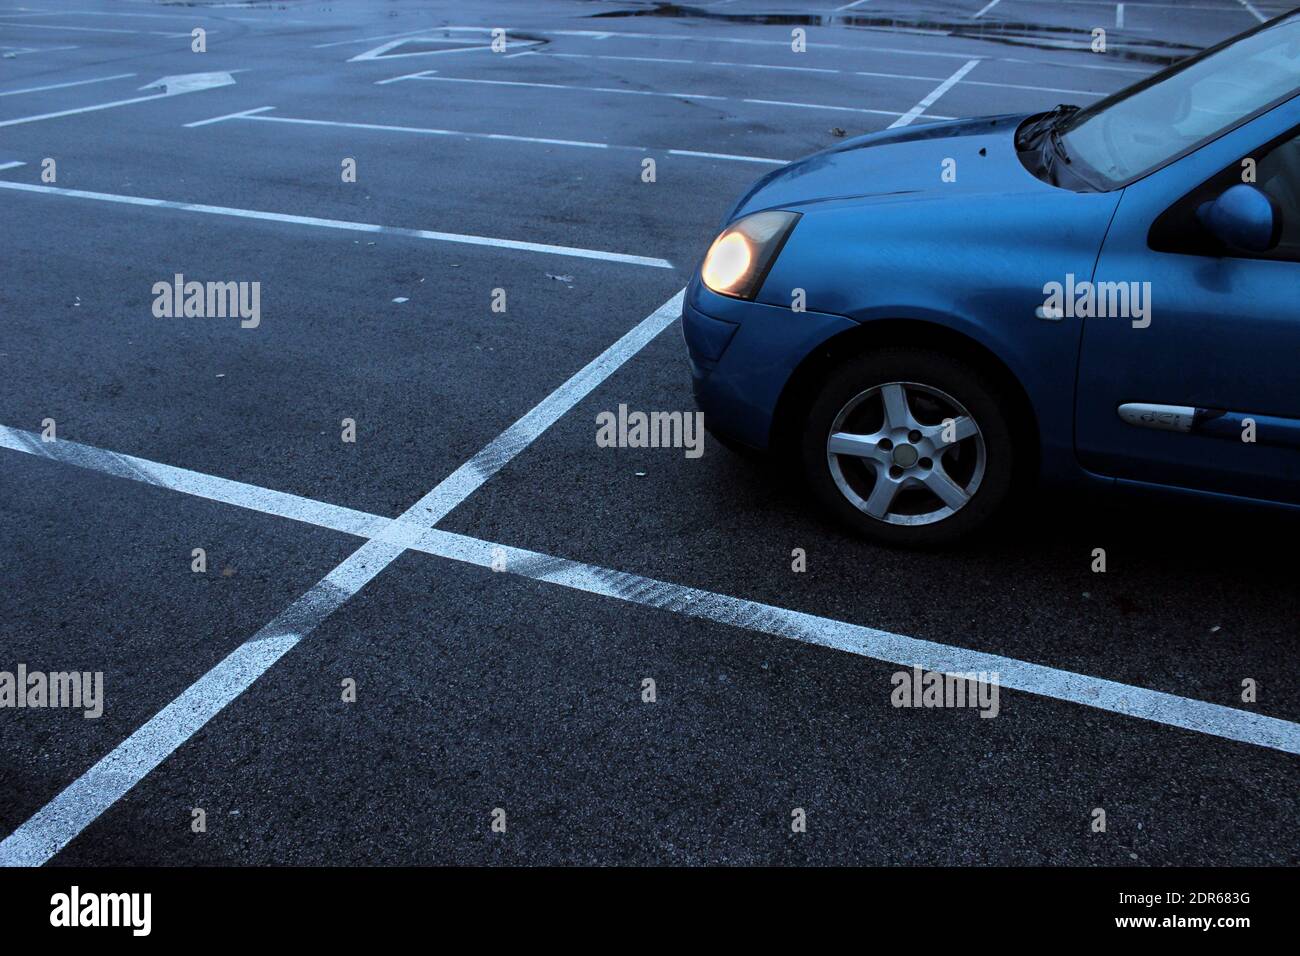 Blue car in parking space Stock Photo